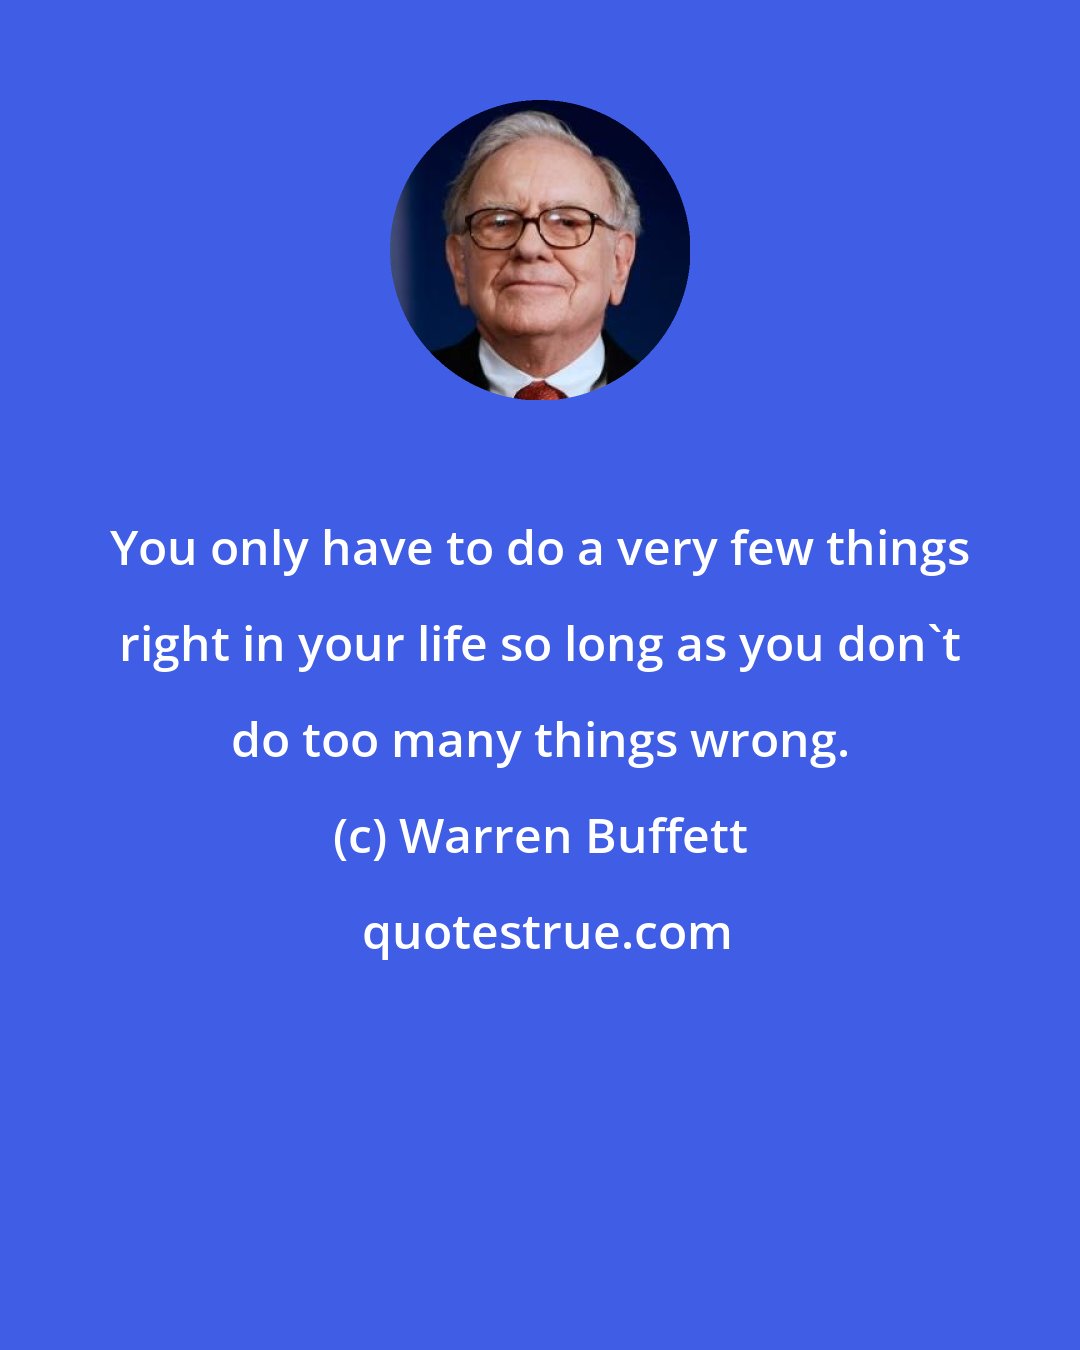 Warren Buffett: You only have to do a very few things right in your life so long as you don't do too many things wrong.